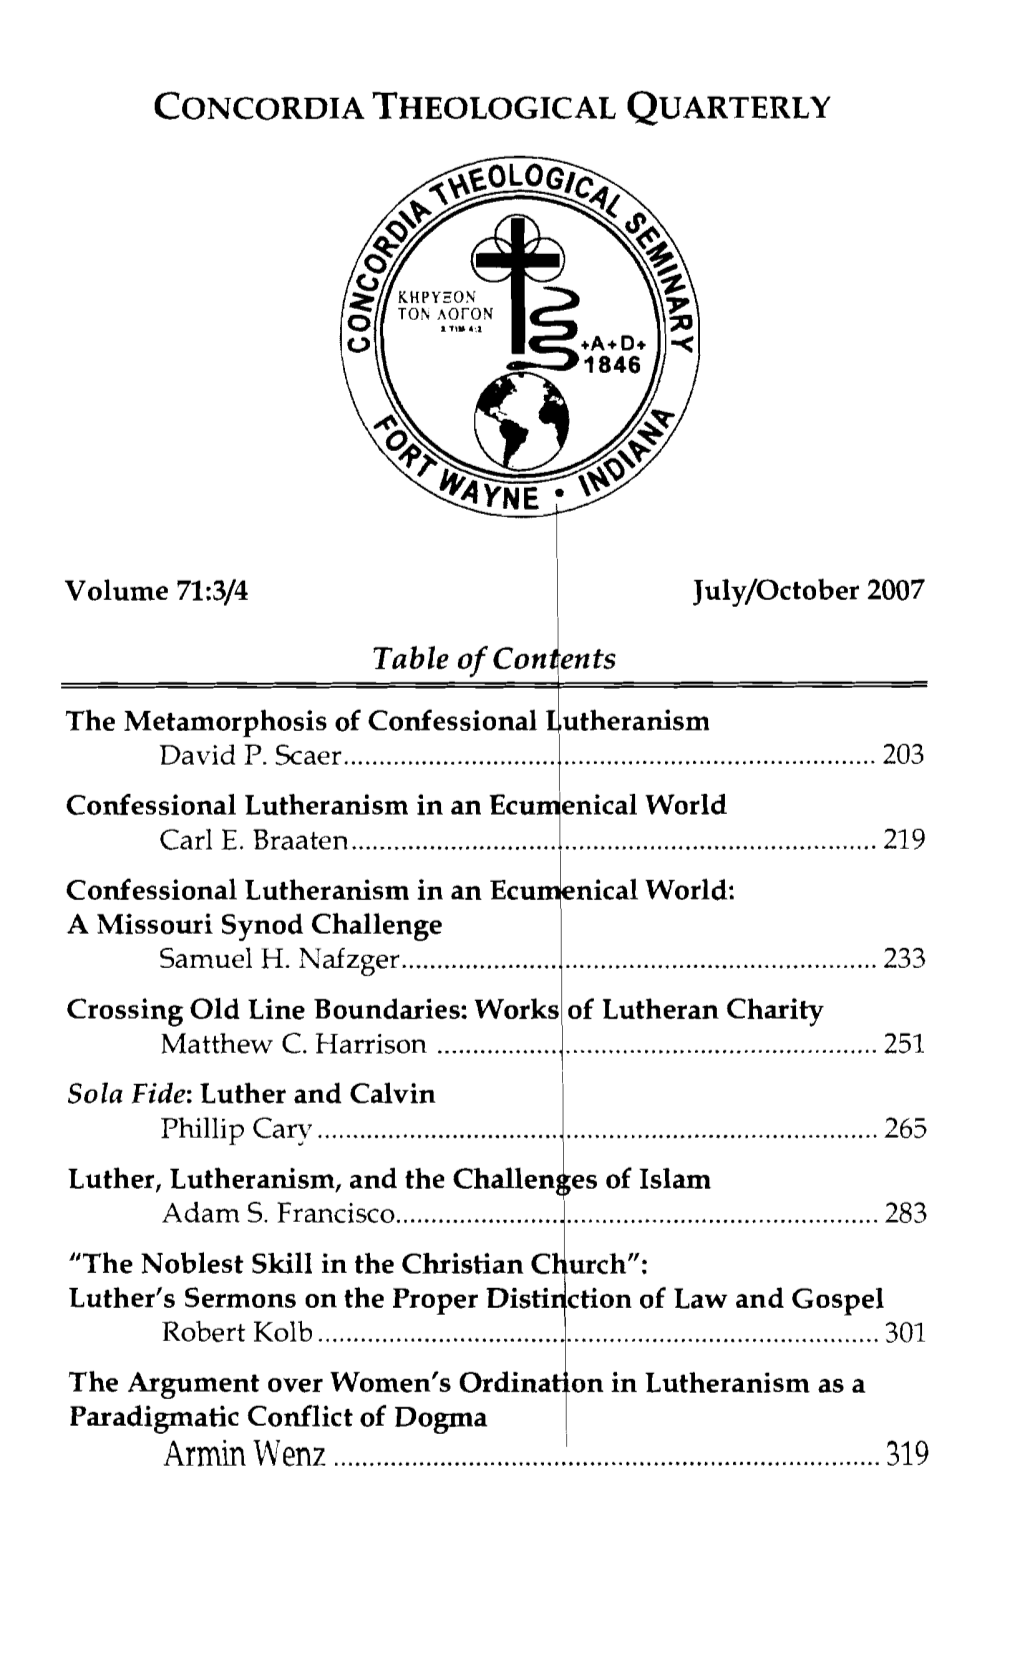 Crossing Old-Line Boundaries: the Works of Lutheran Charity